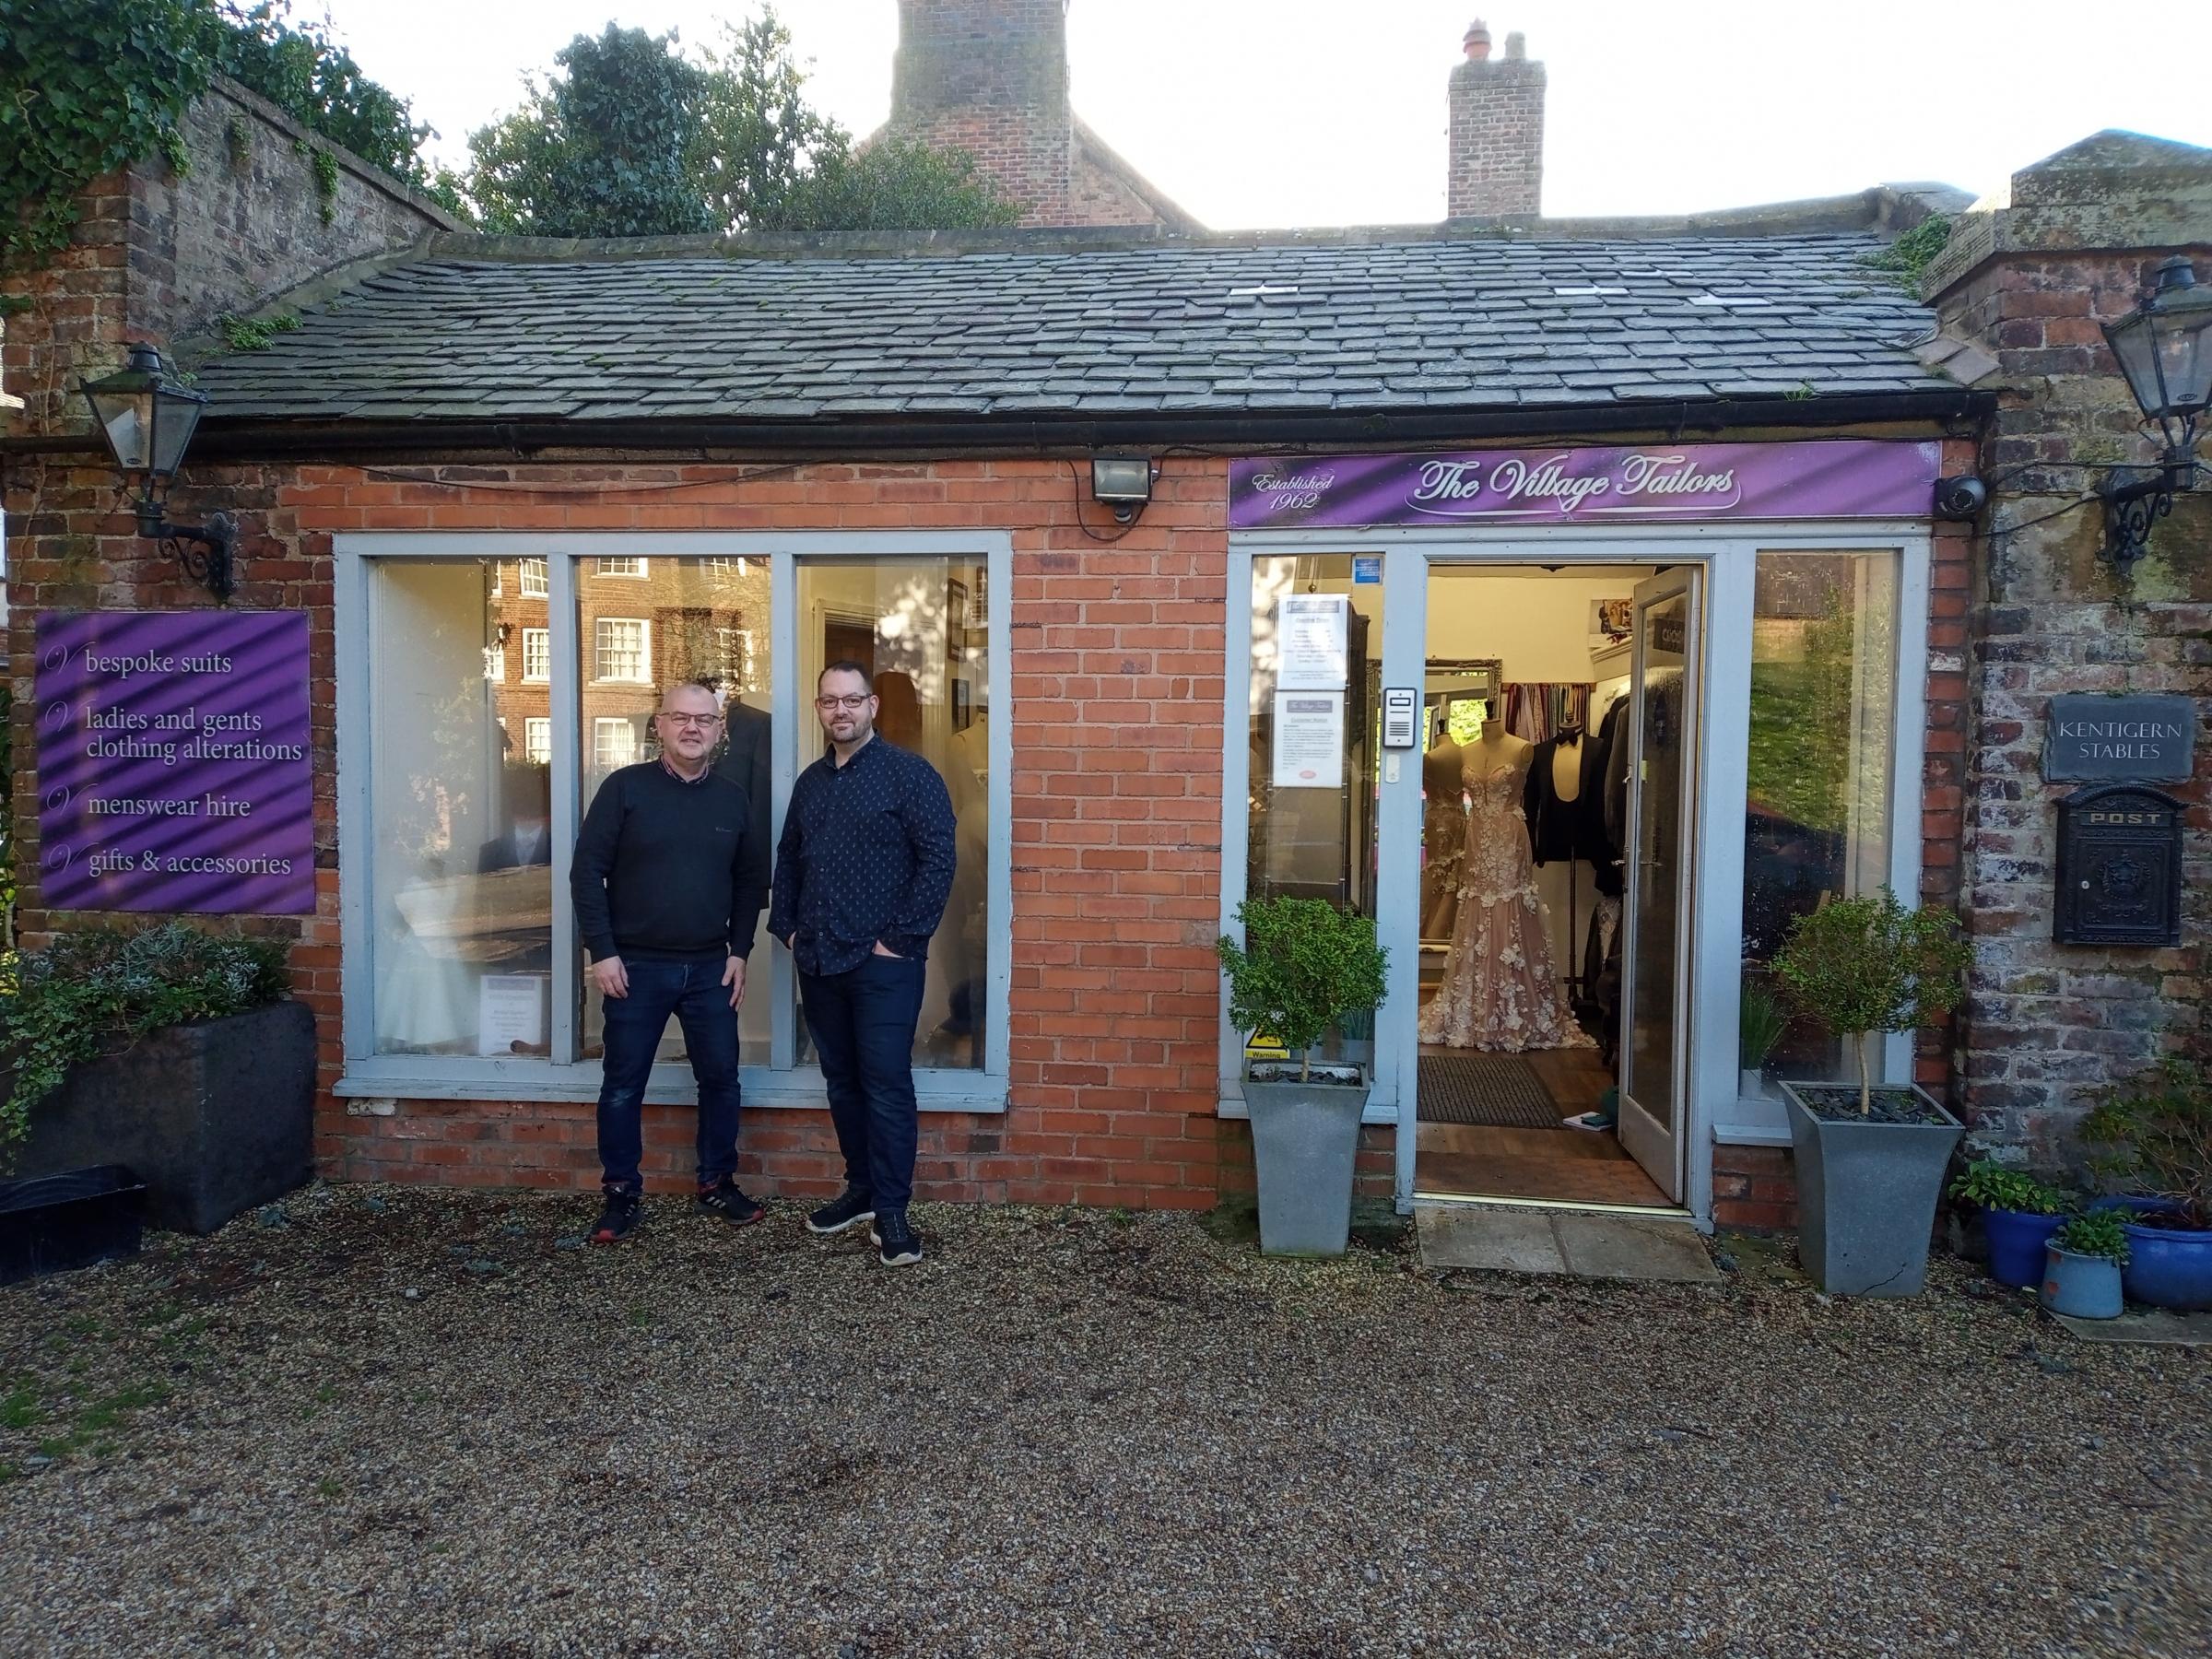 Mark Rogers and Shane Moore outside The Village Tailors in Hawarden.